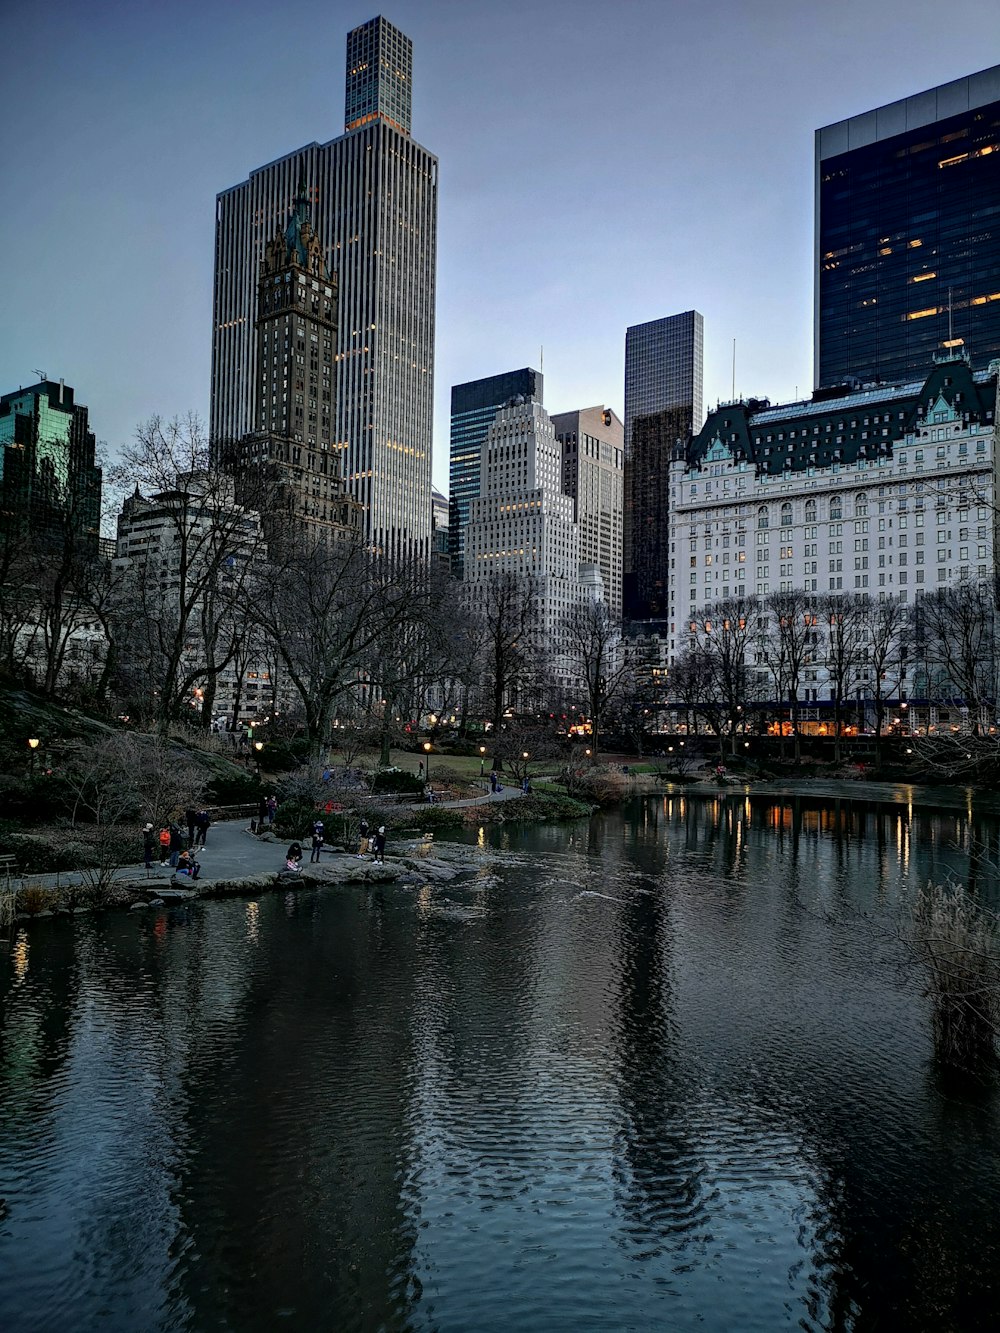 a lake in a city with tall buildings in the background